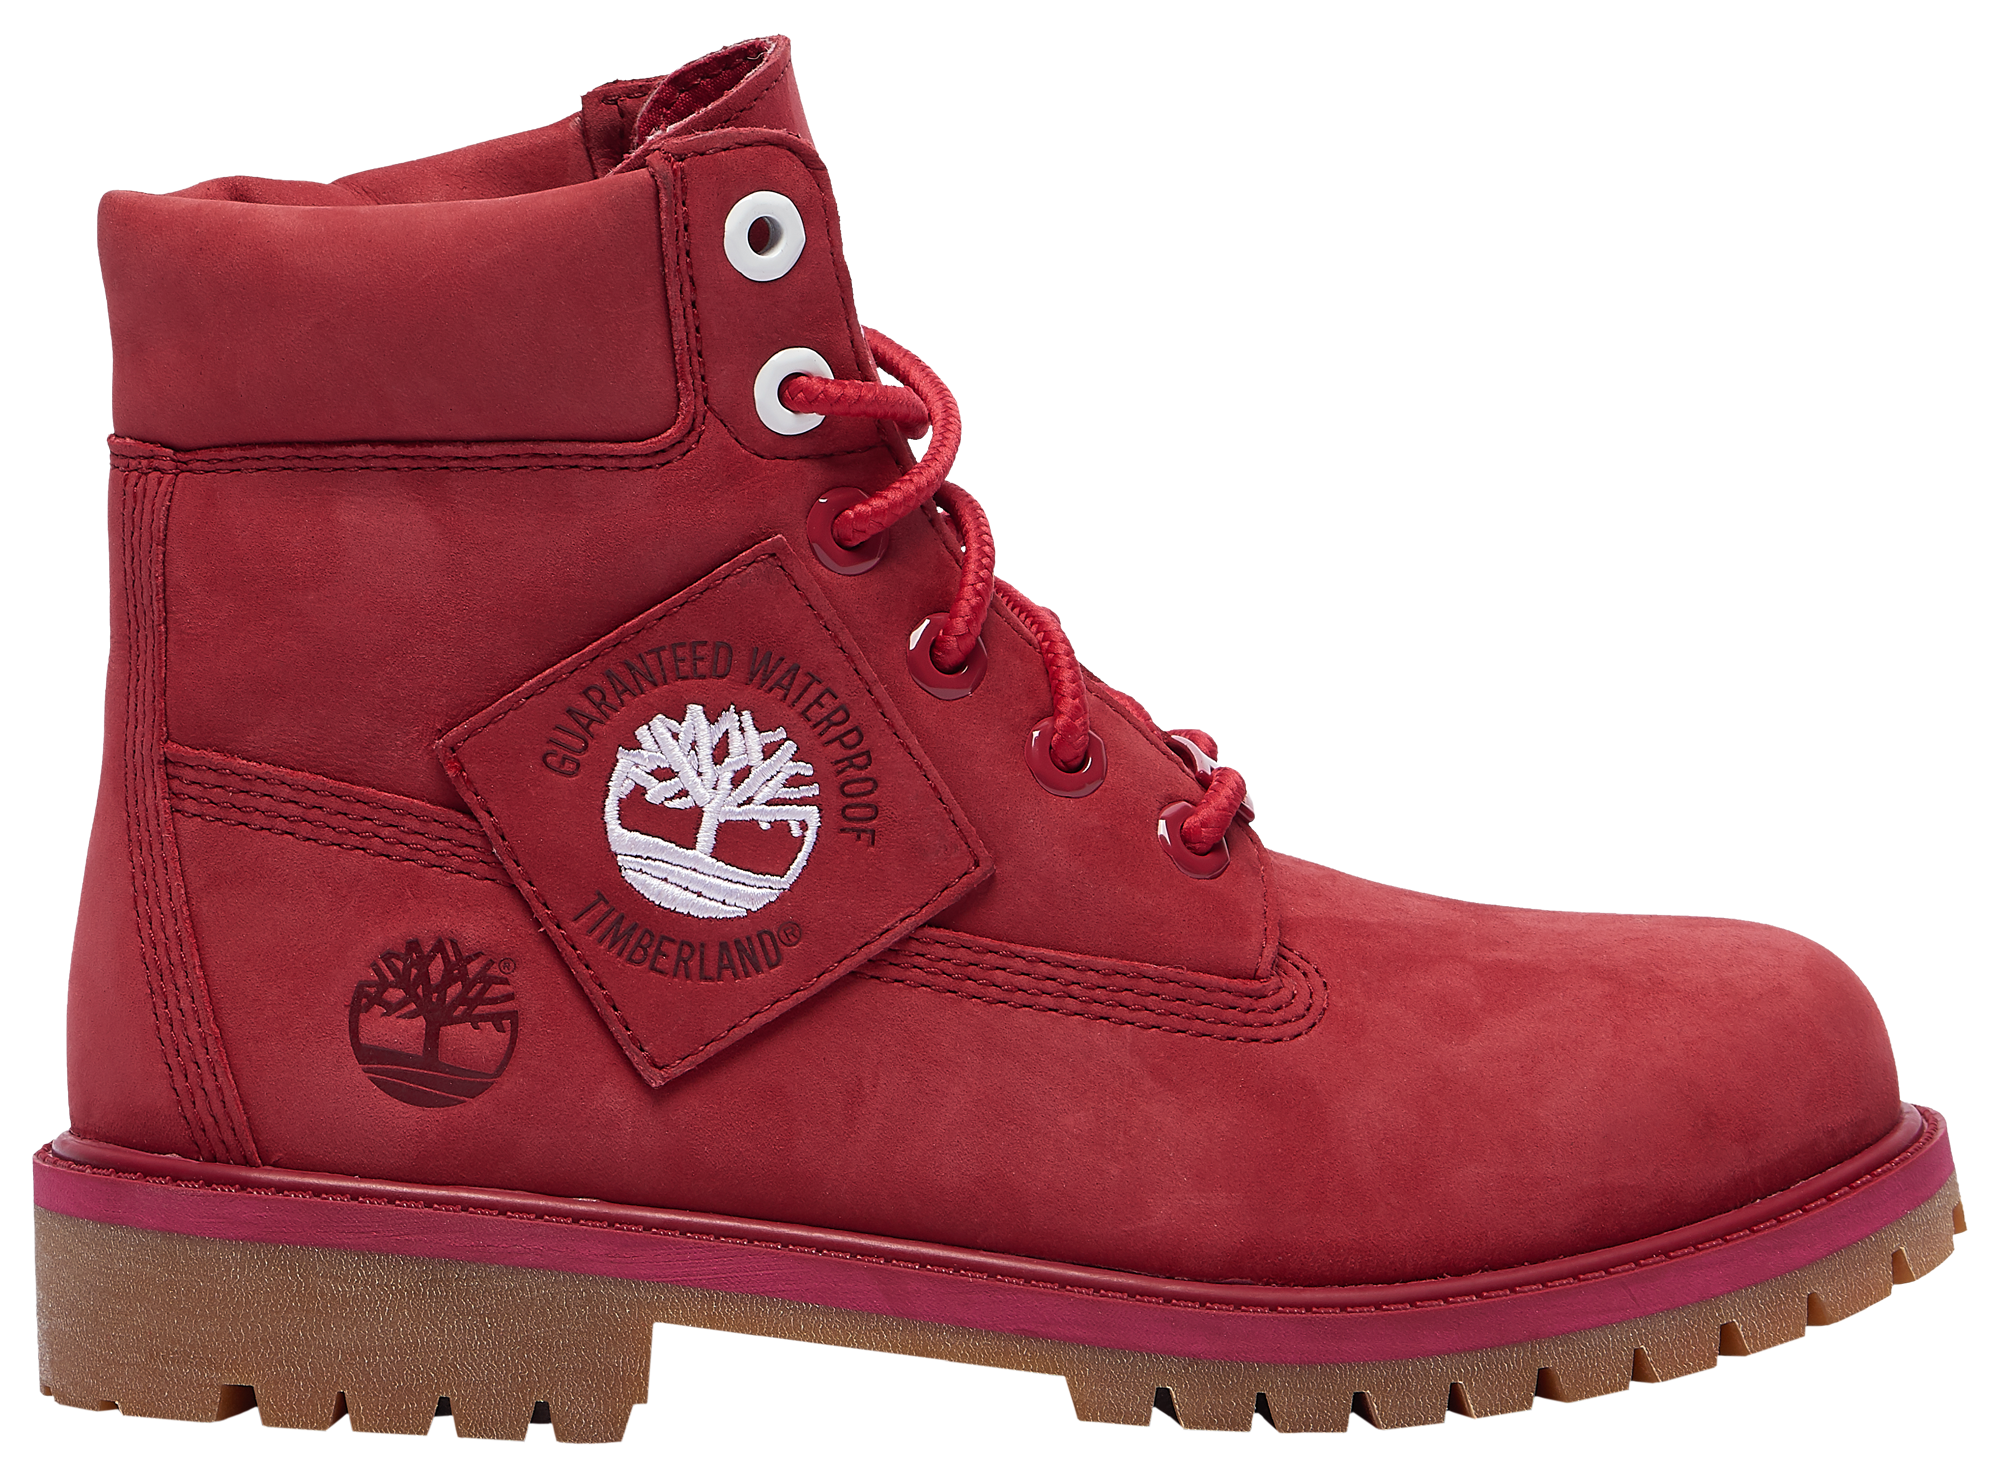 timberland 2018 shoes